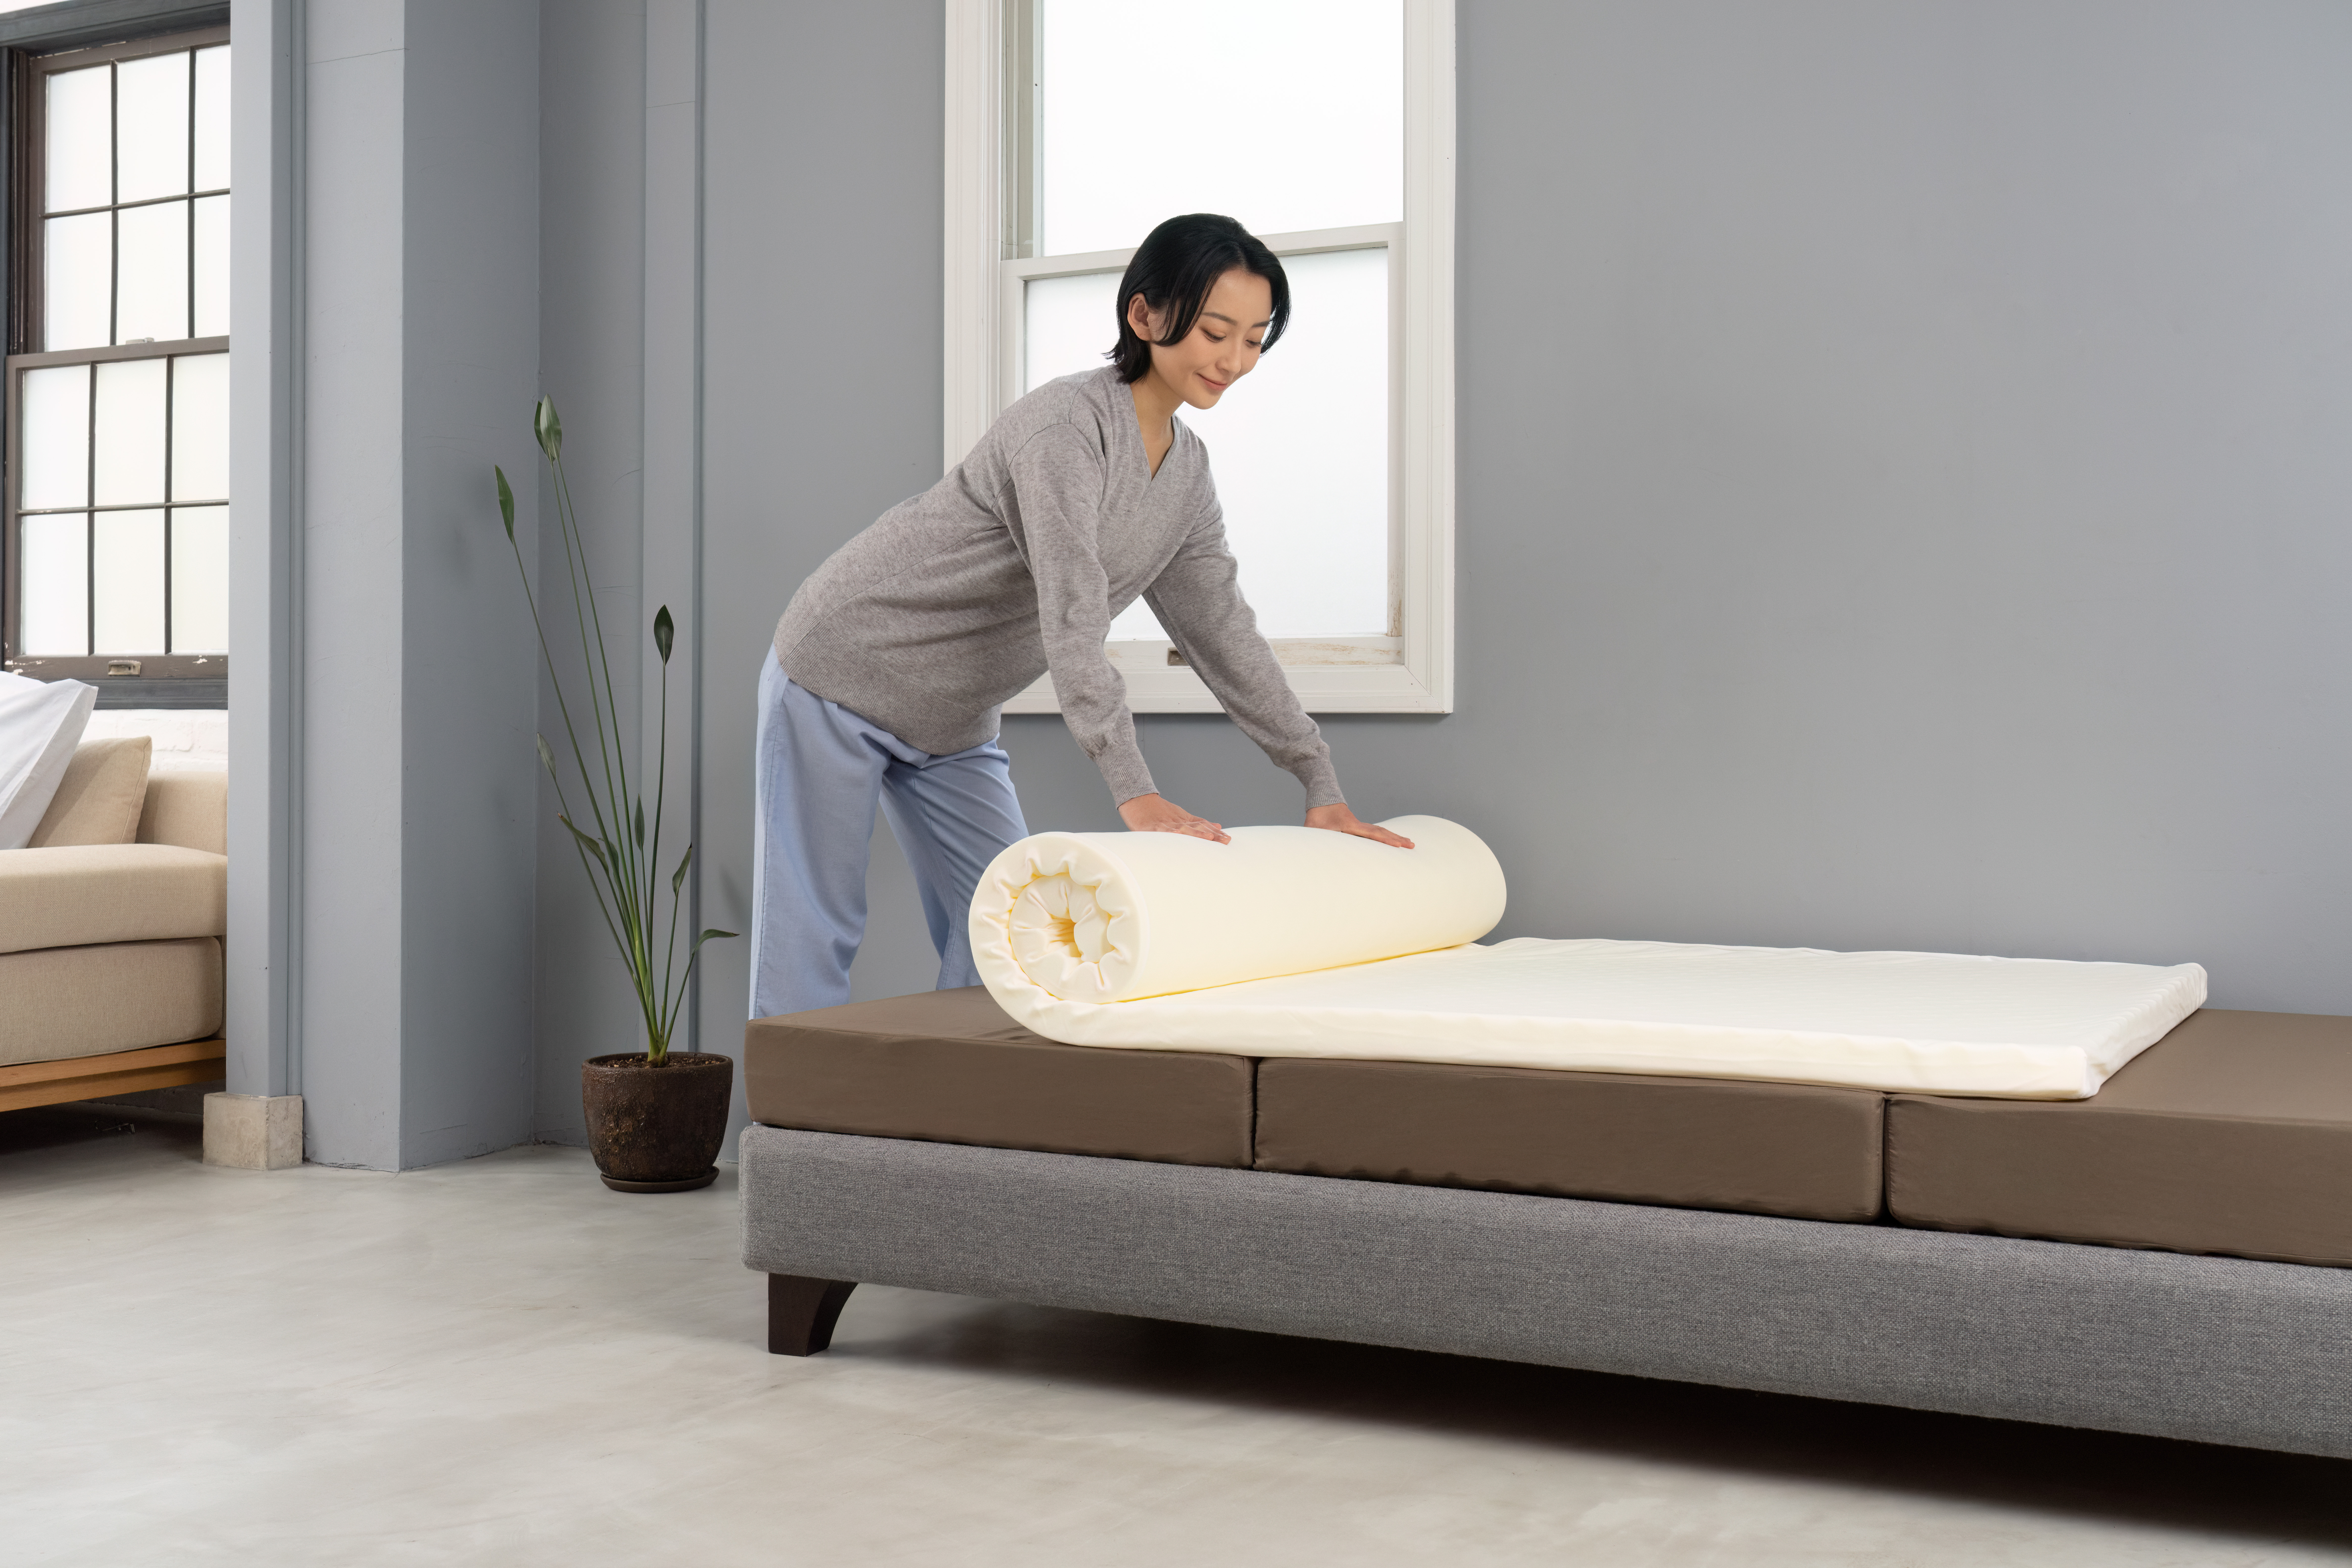 Contribute to a carbon-neutral society simply by placing this product on your mattress<br>Archem Inc. launches D-sleep Eco, which achieves a combination of environmental friendliness and comfortable sleep, by adopting its first palm-derived material